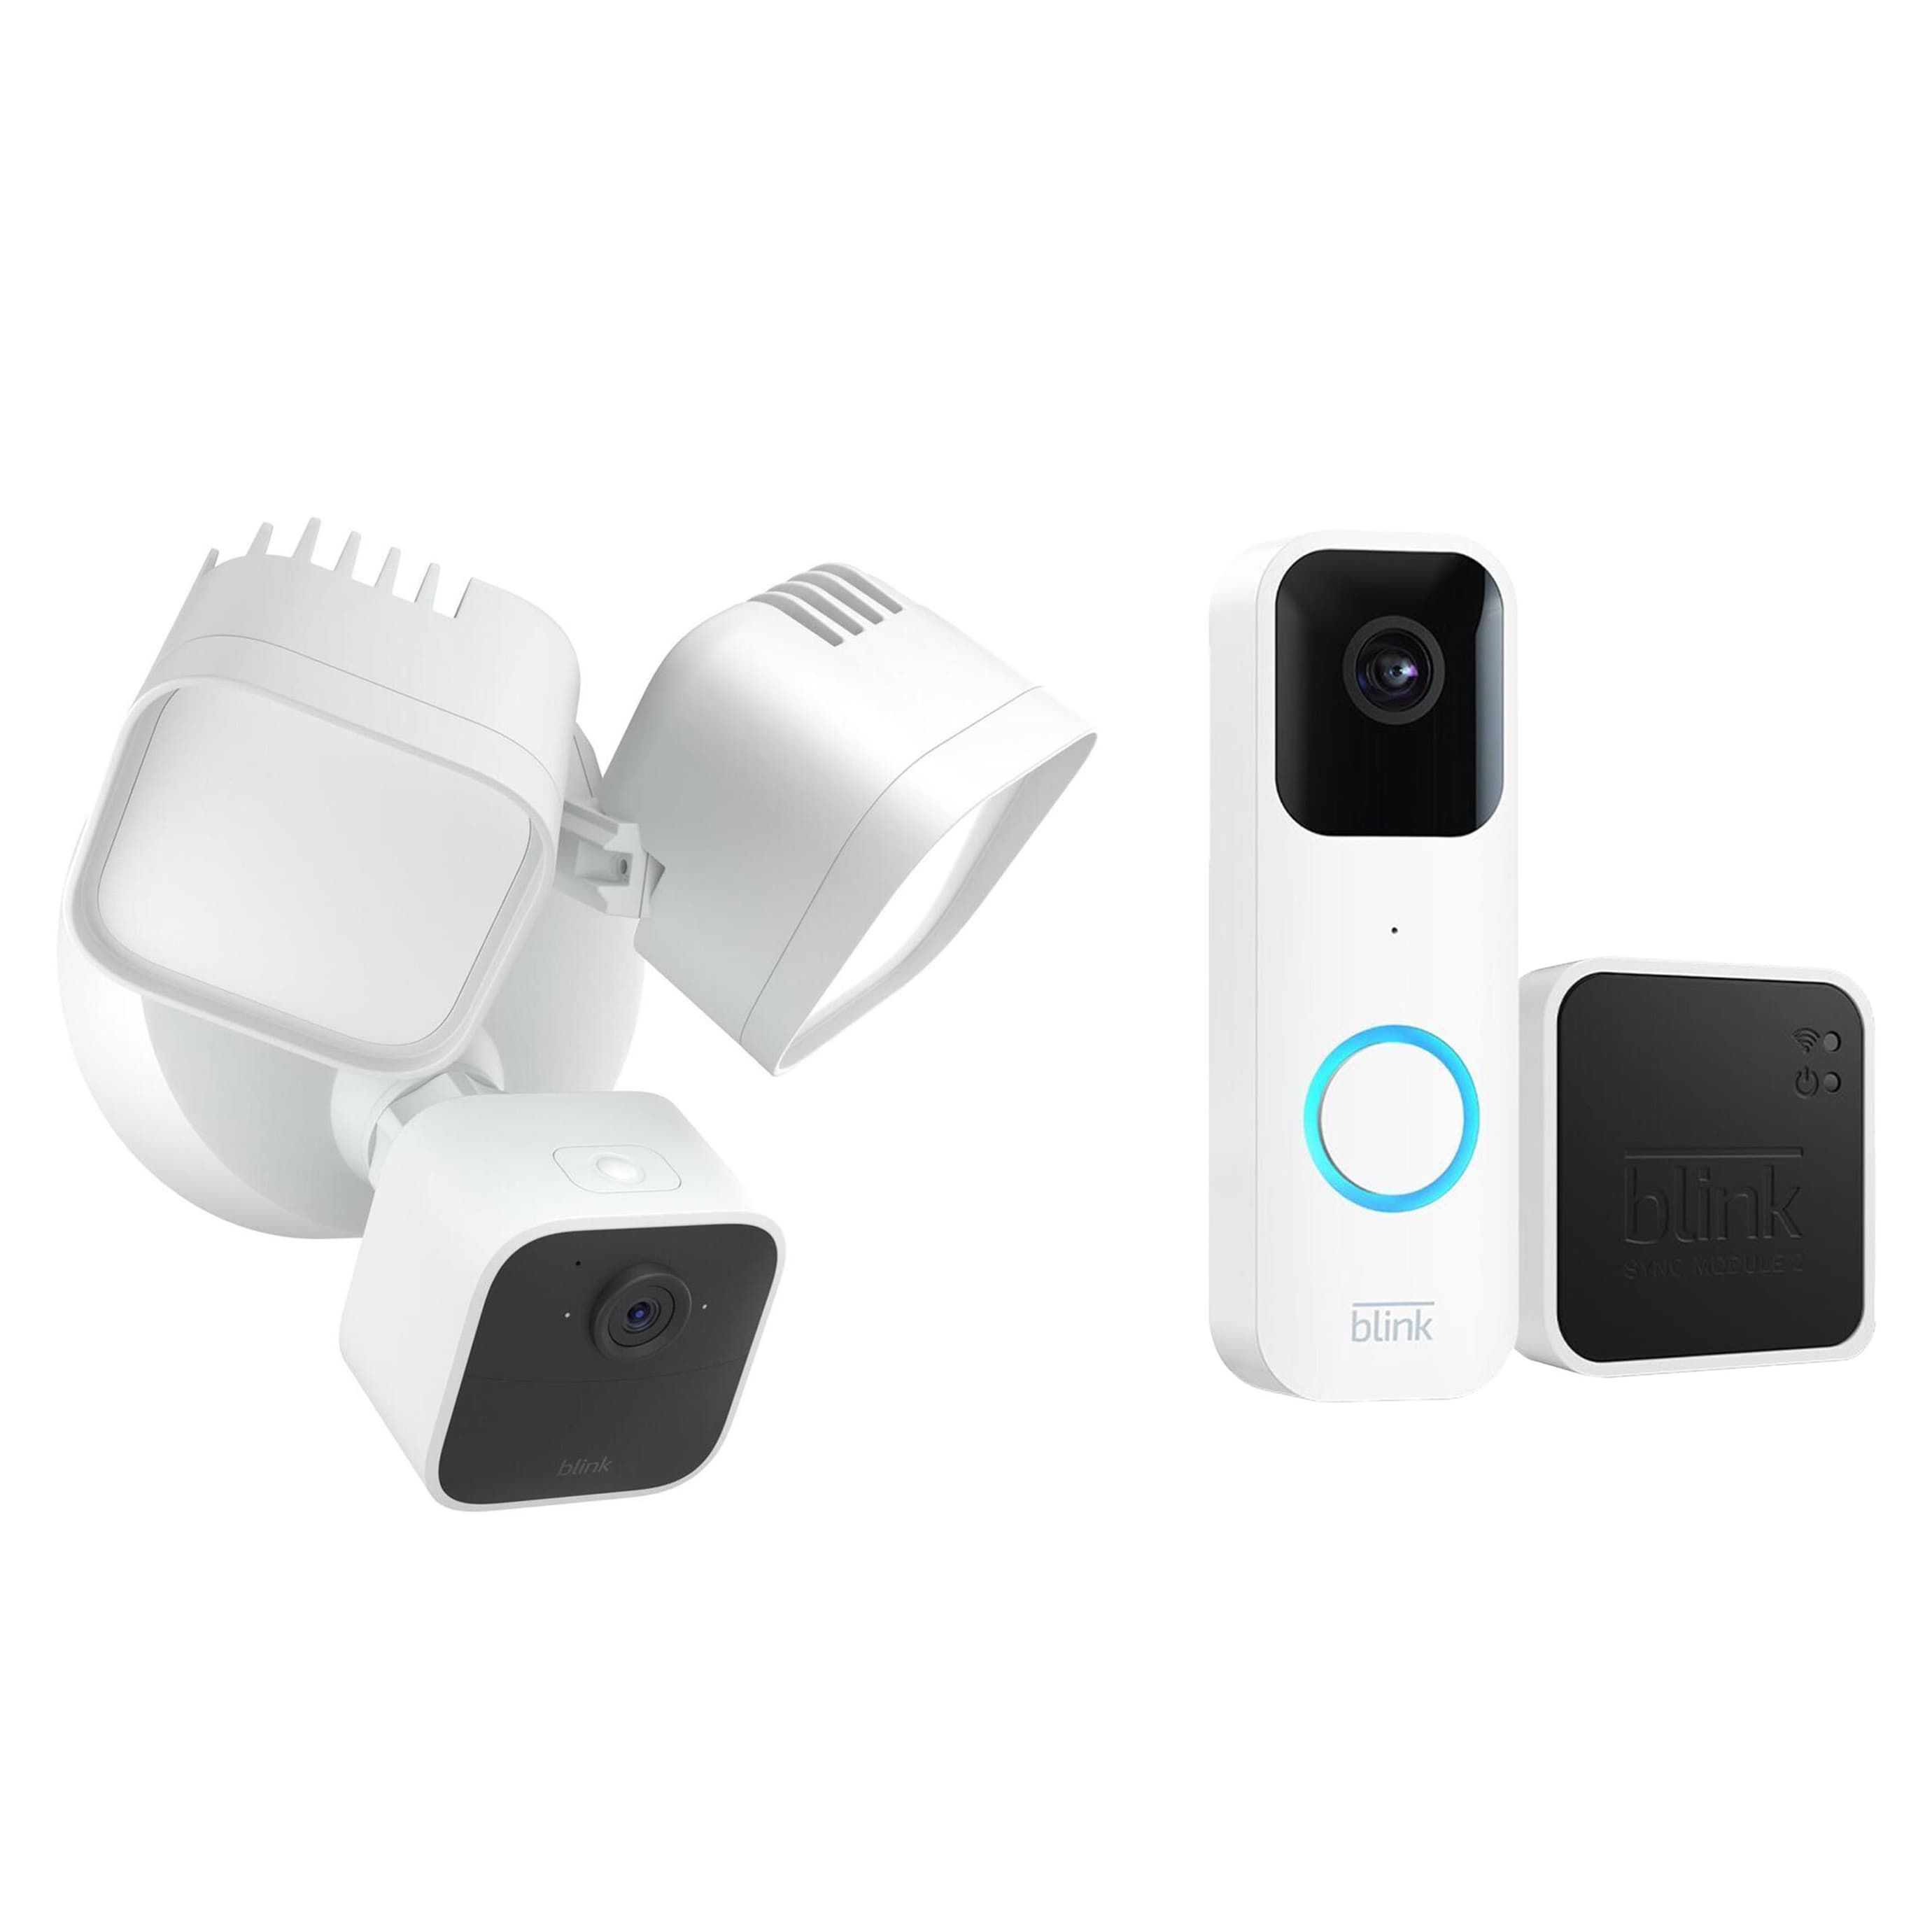 Blink Wired Floodlight Smart Security Camera, White + Wired or Wireless Smart Video Doorbell with Sync Module 2, White